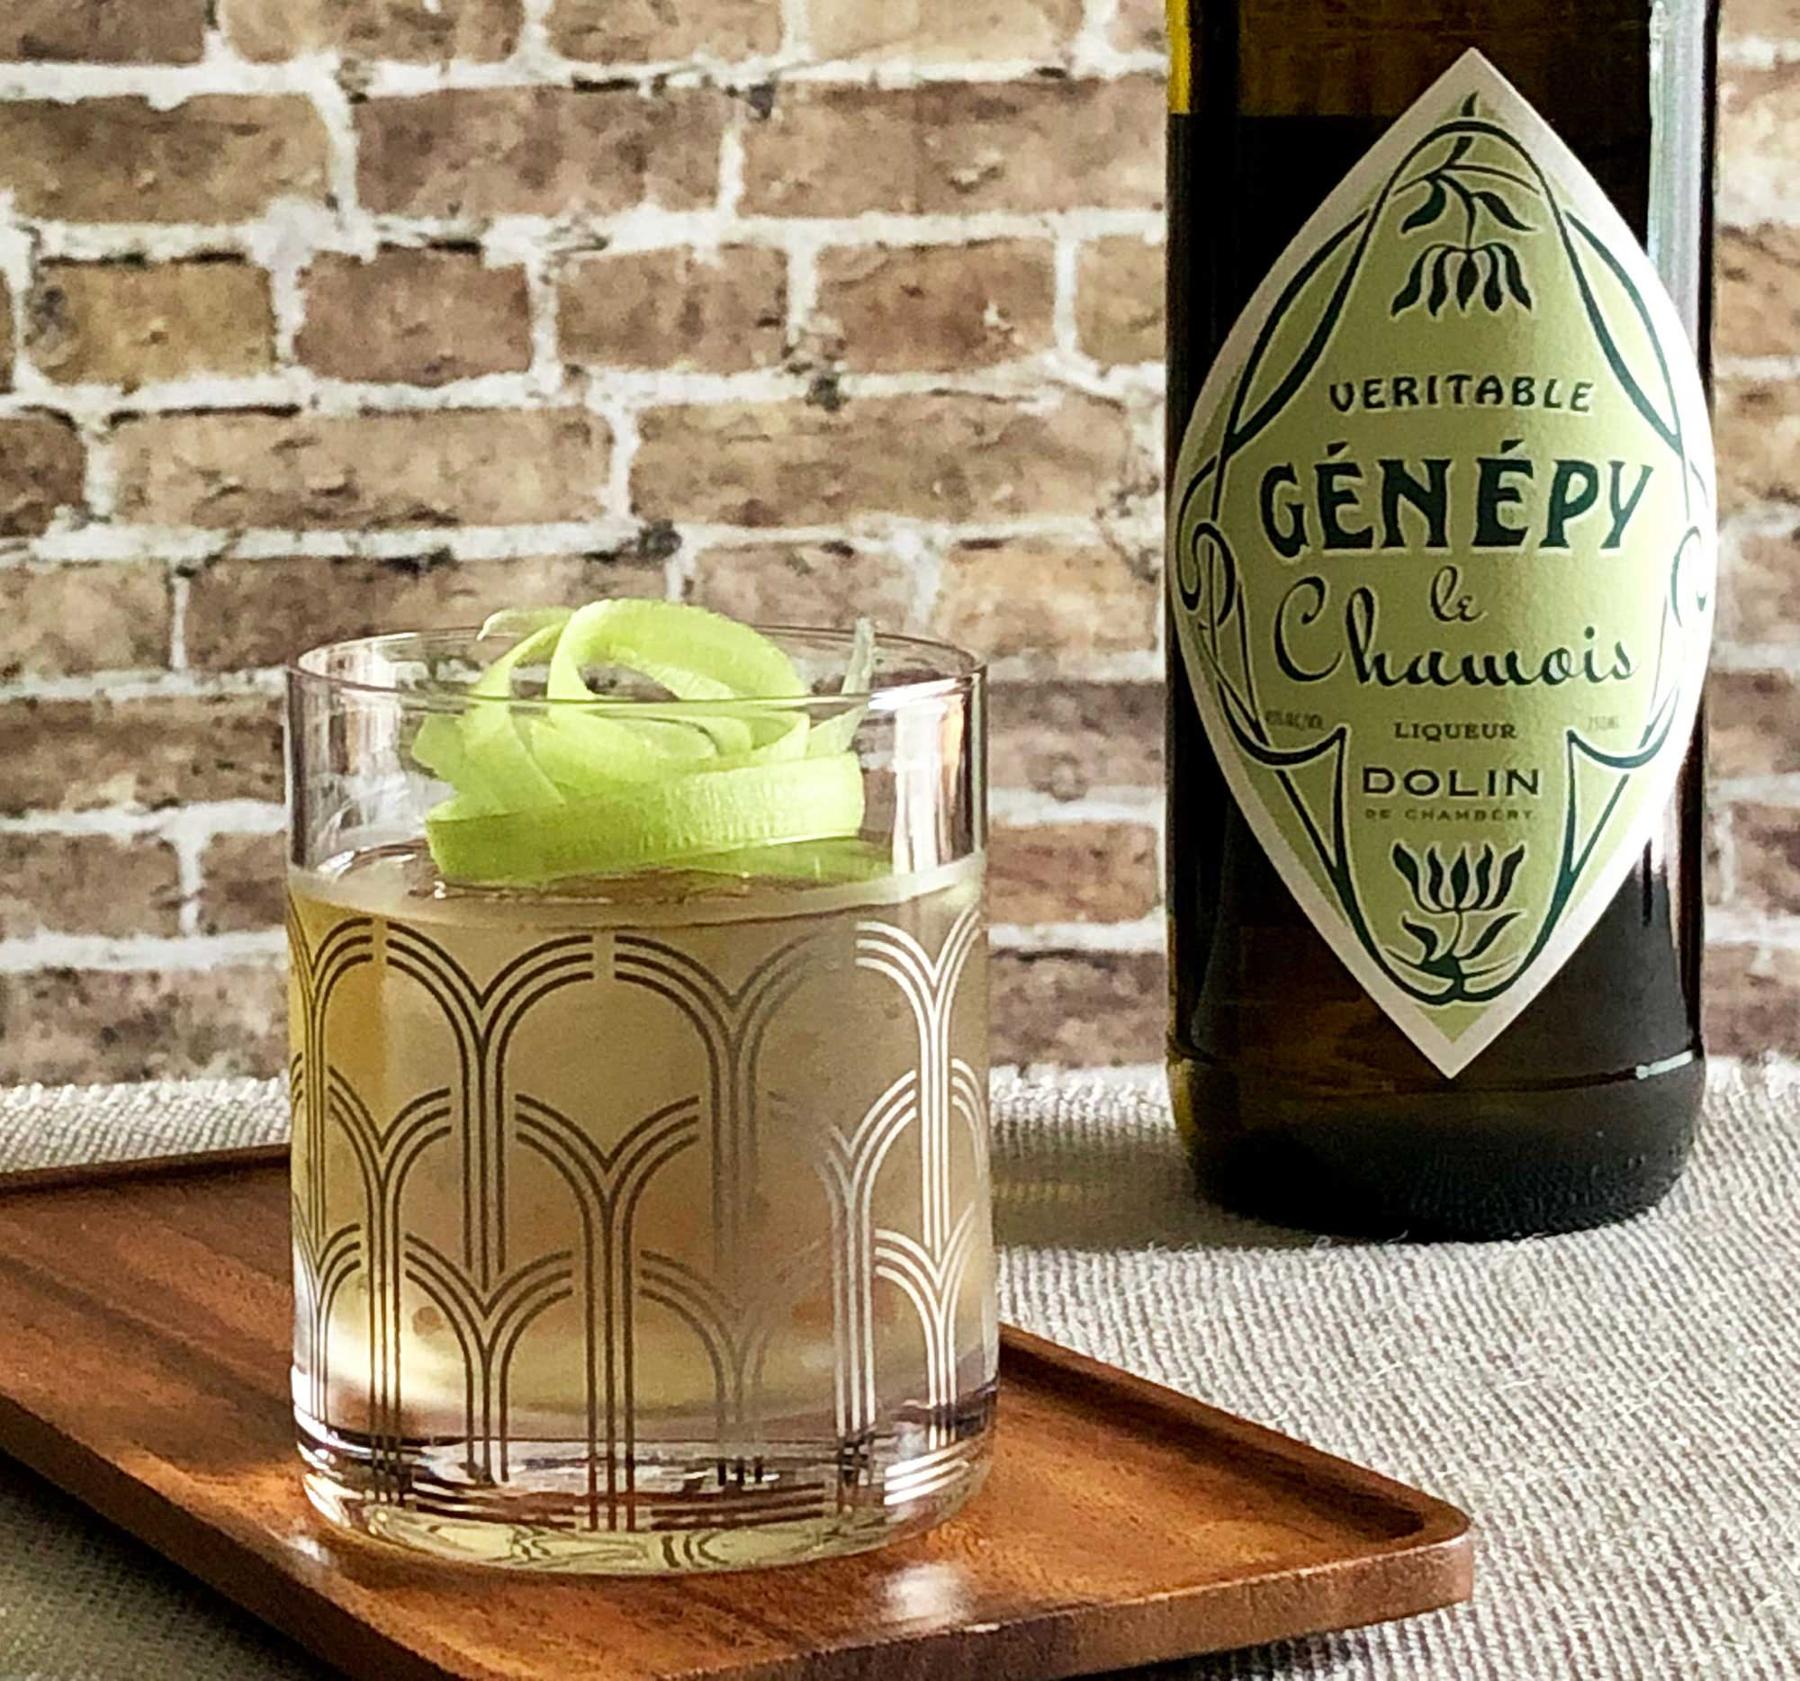 An example of the Gaelic Gardener, the mixed drink (drink), by Alex Gregg, Moving Sidewalk, Houston, featuring irish whiskey, Dolin Blanc Vermouth de Chambéry, Dolin Génépy le Chamois Liqueur, celery bitters, and celery stalk; photo by Lee Edwards